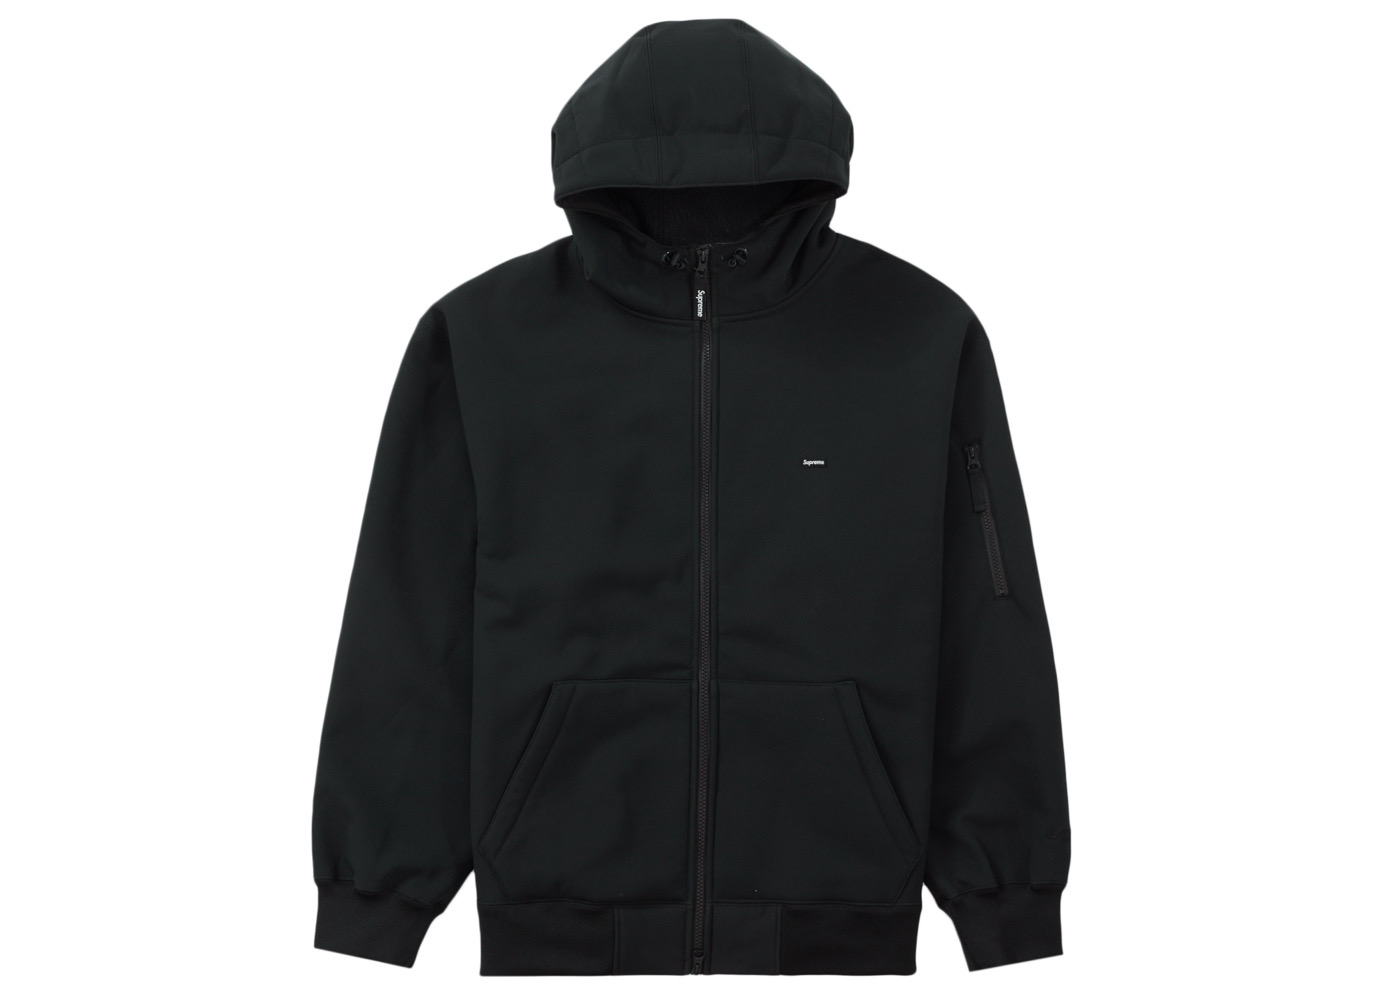 Supreme Windstopper Zip Up Hooded正規代理店で購入しました